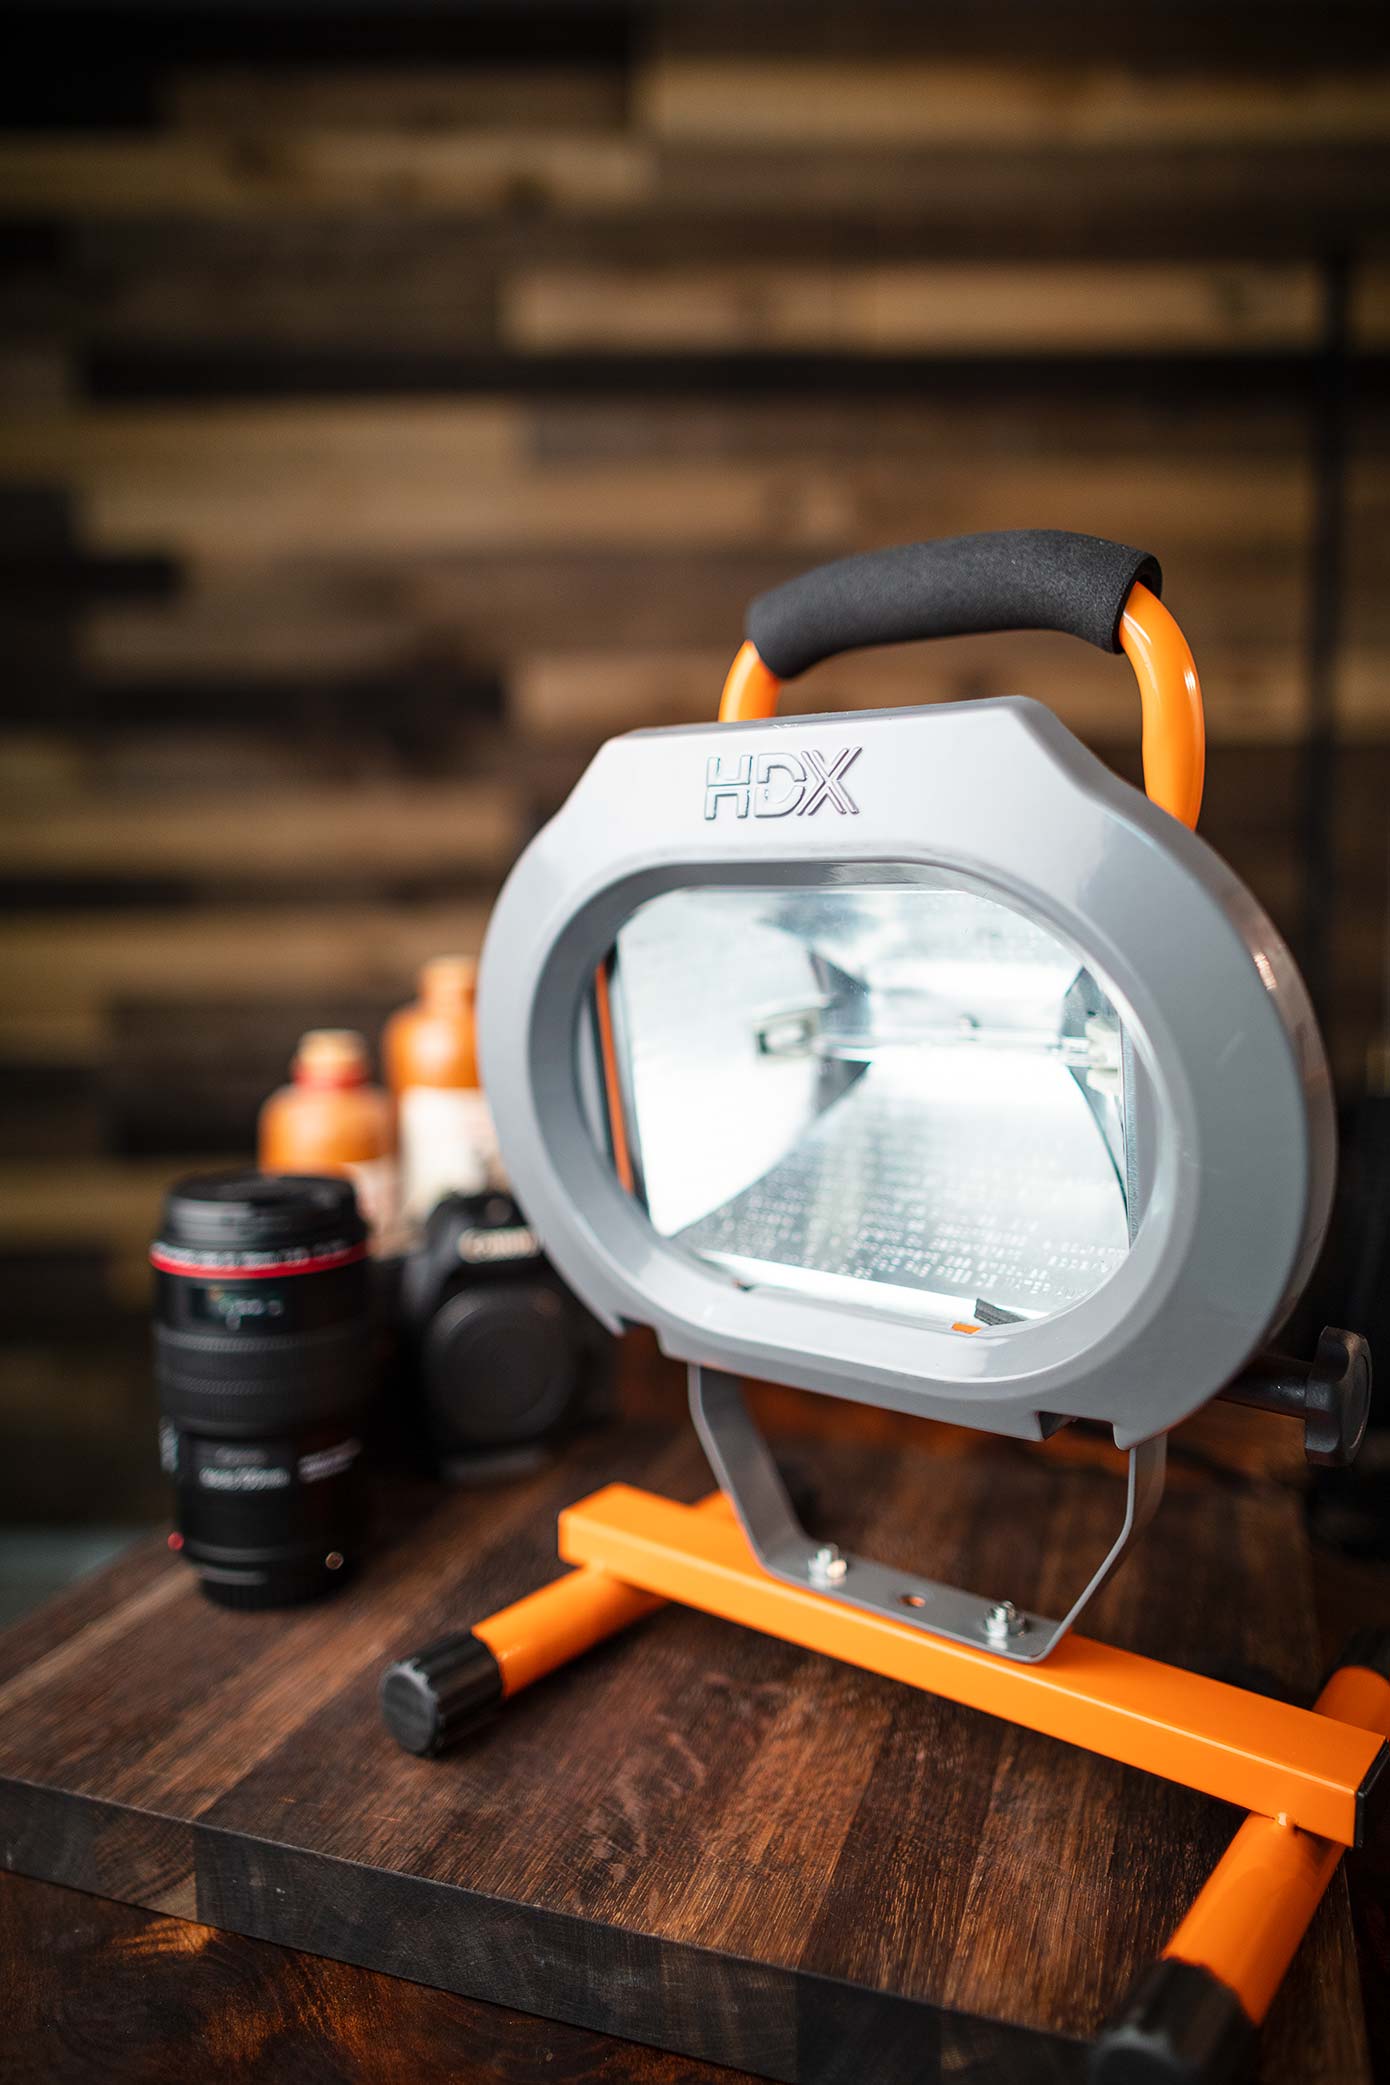 Food Photography Lighting For Cheap 500w Halogen Light